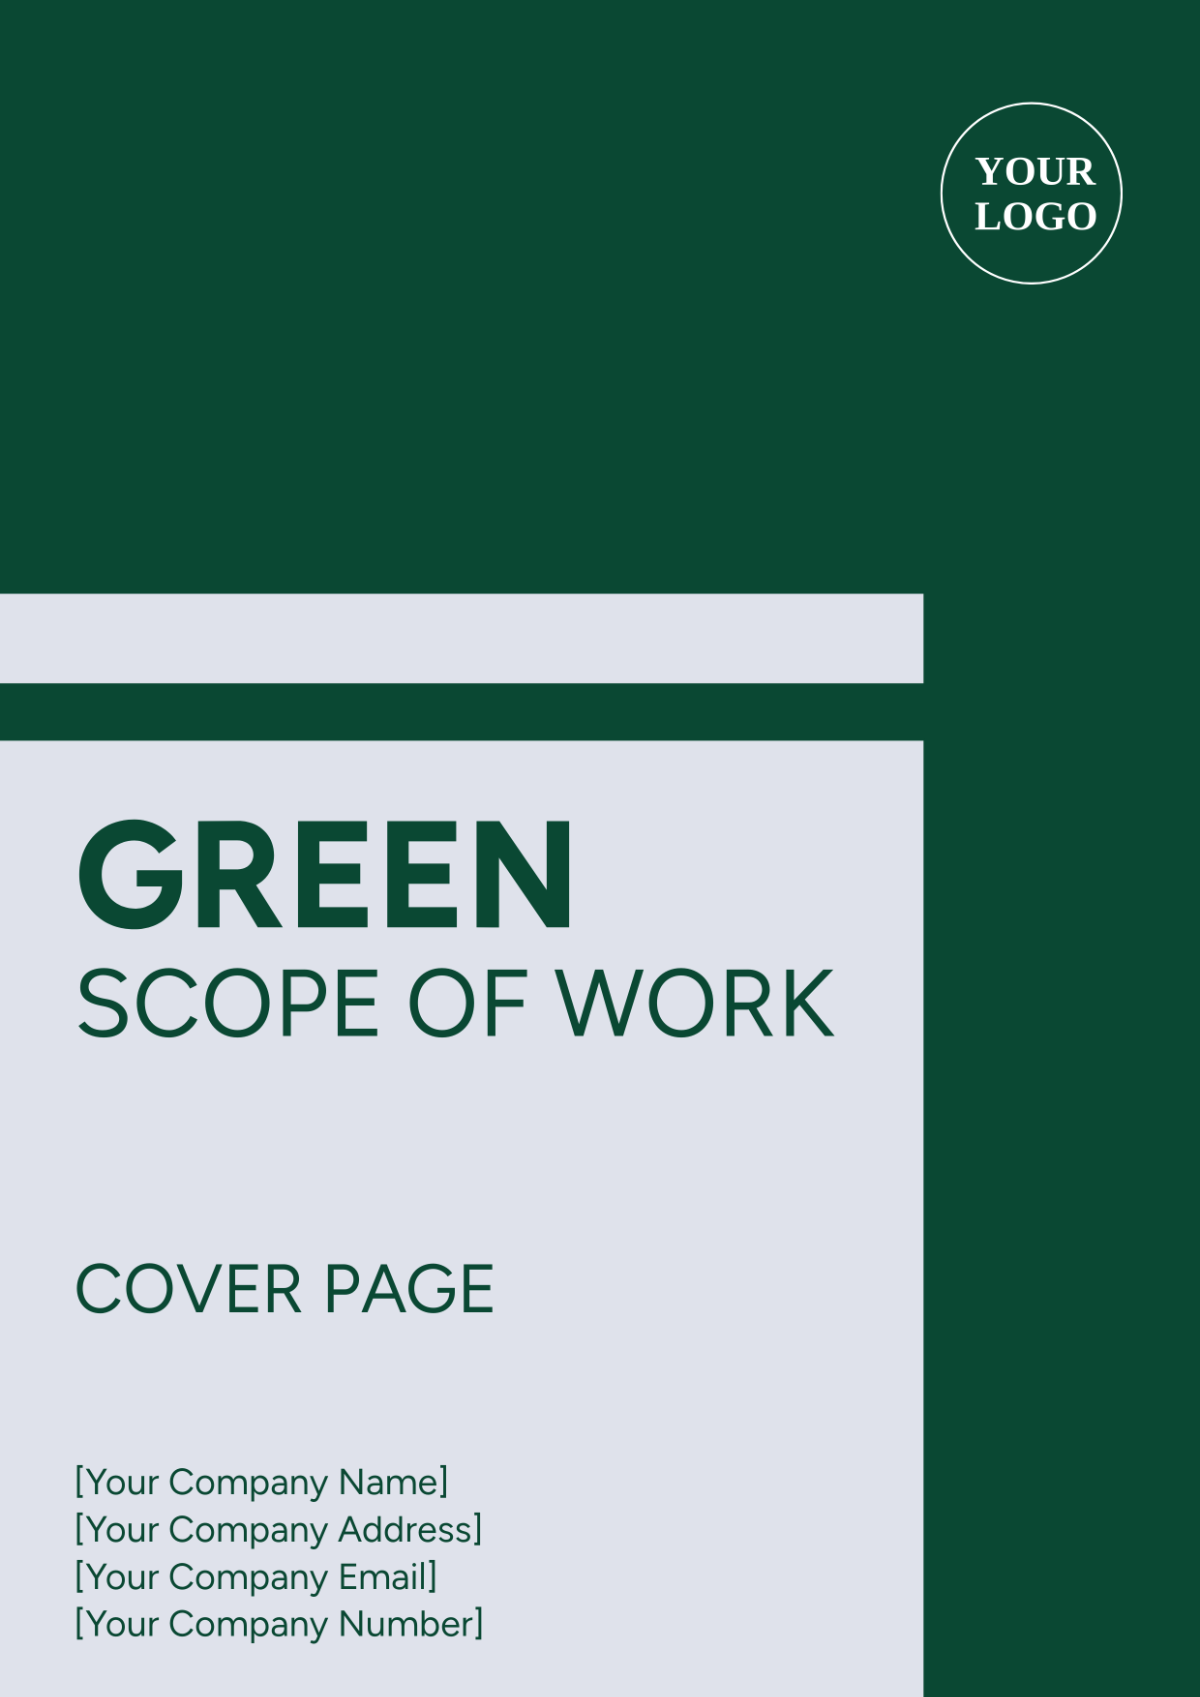 Green Scope of Work Cover Page